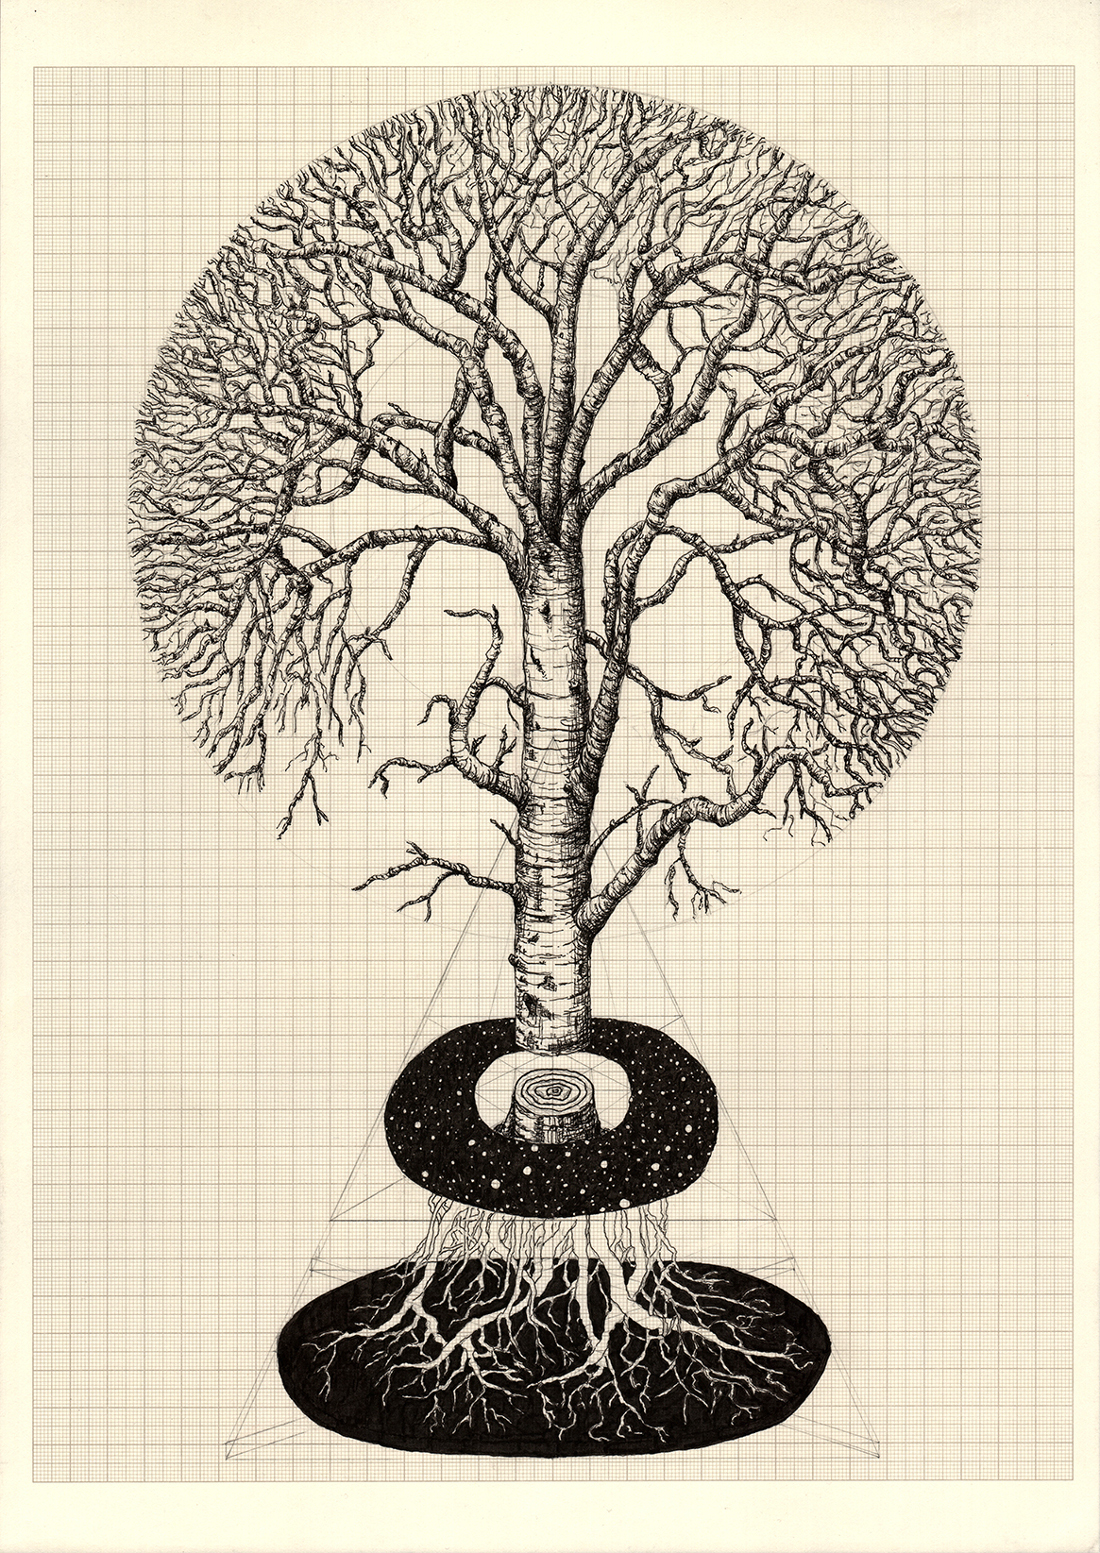 The World Tree, graphite and indian ink on graph paper, 42cm x 29.7cm, 2015